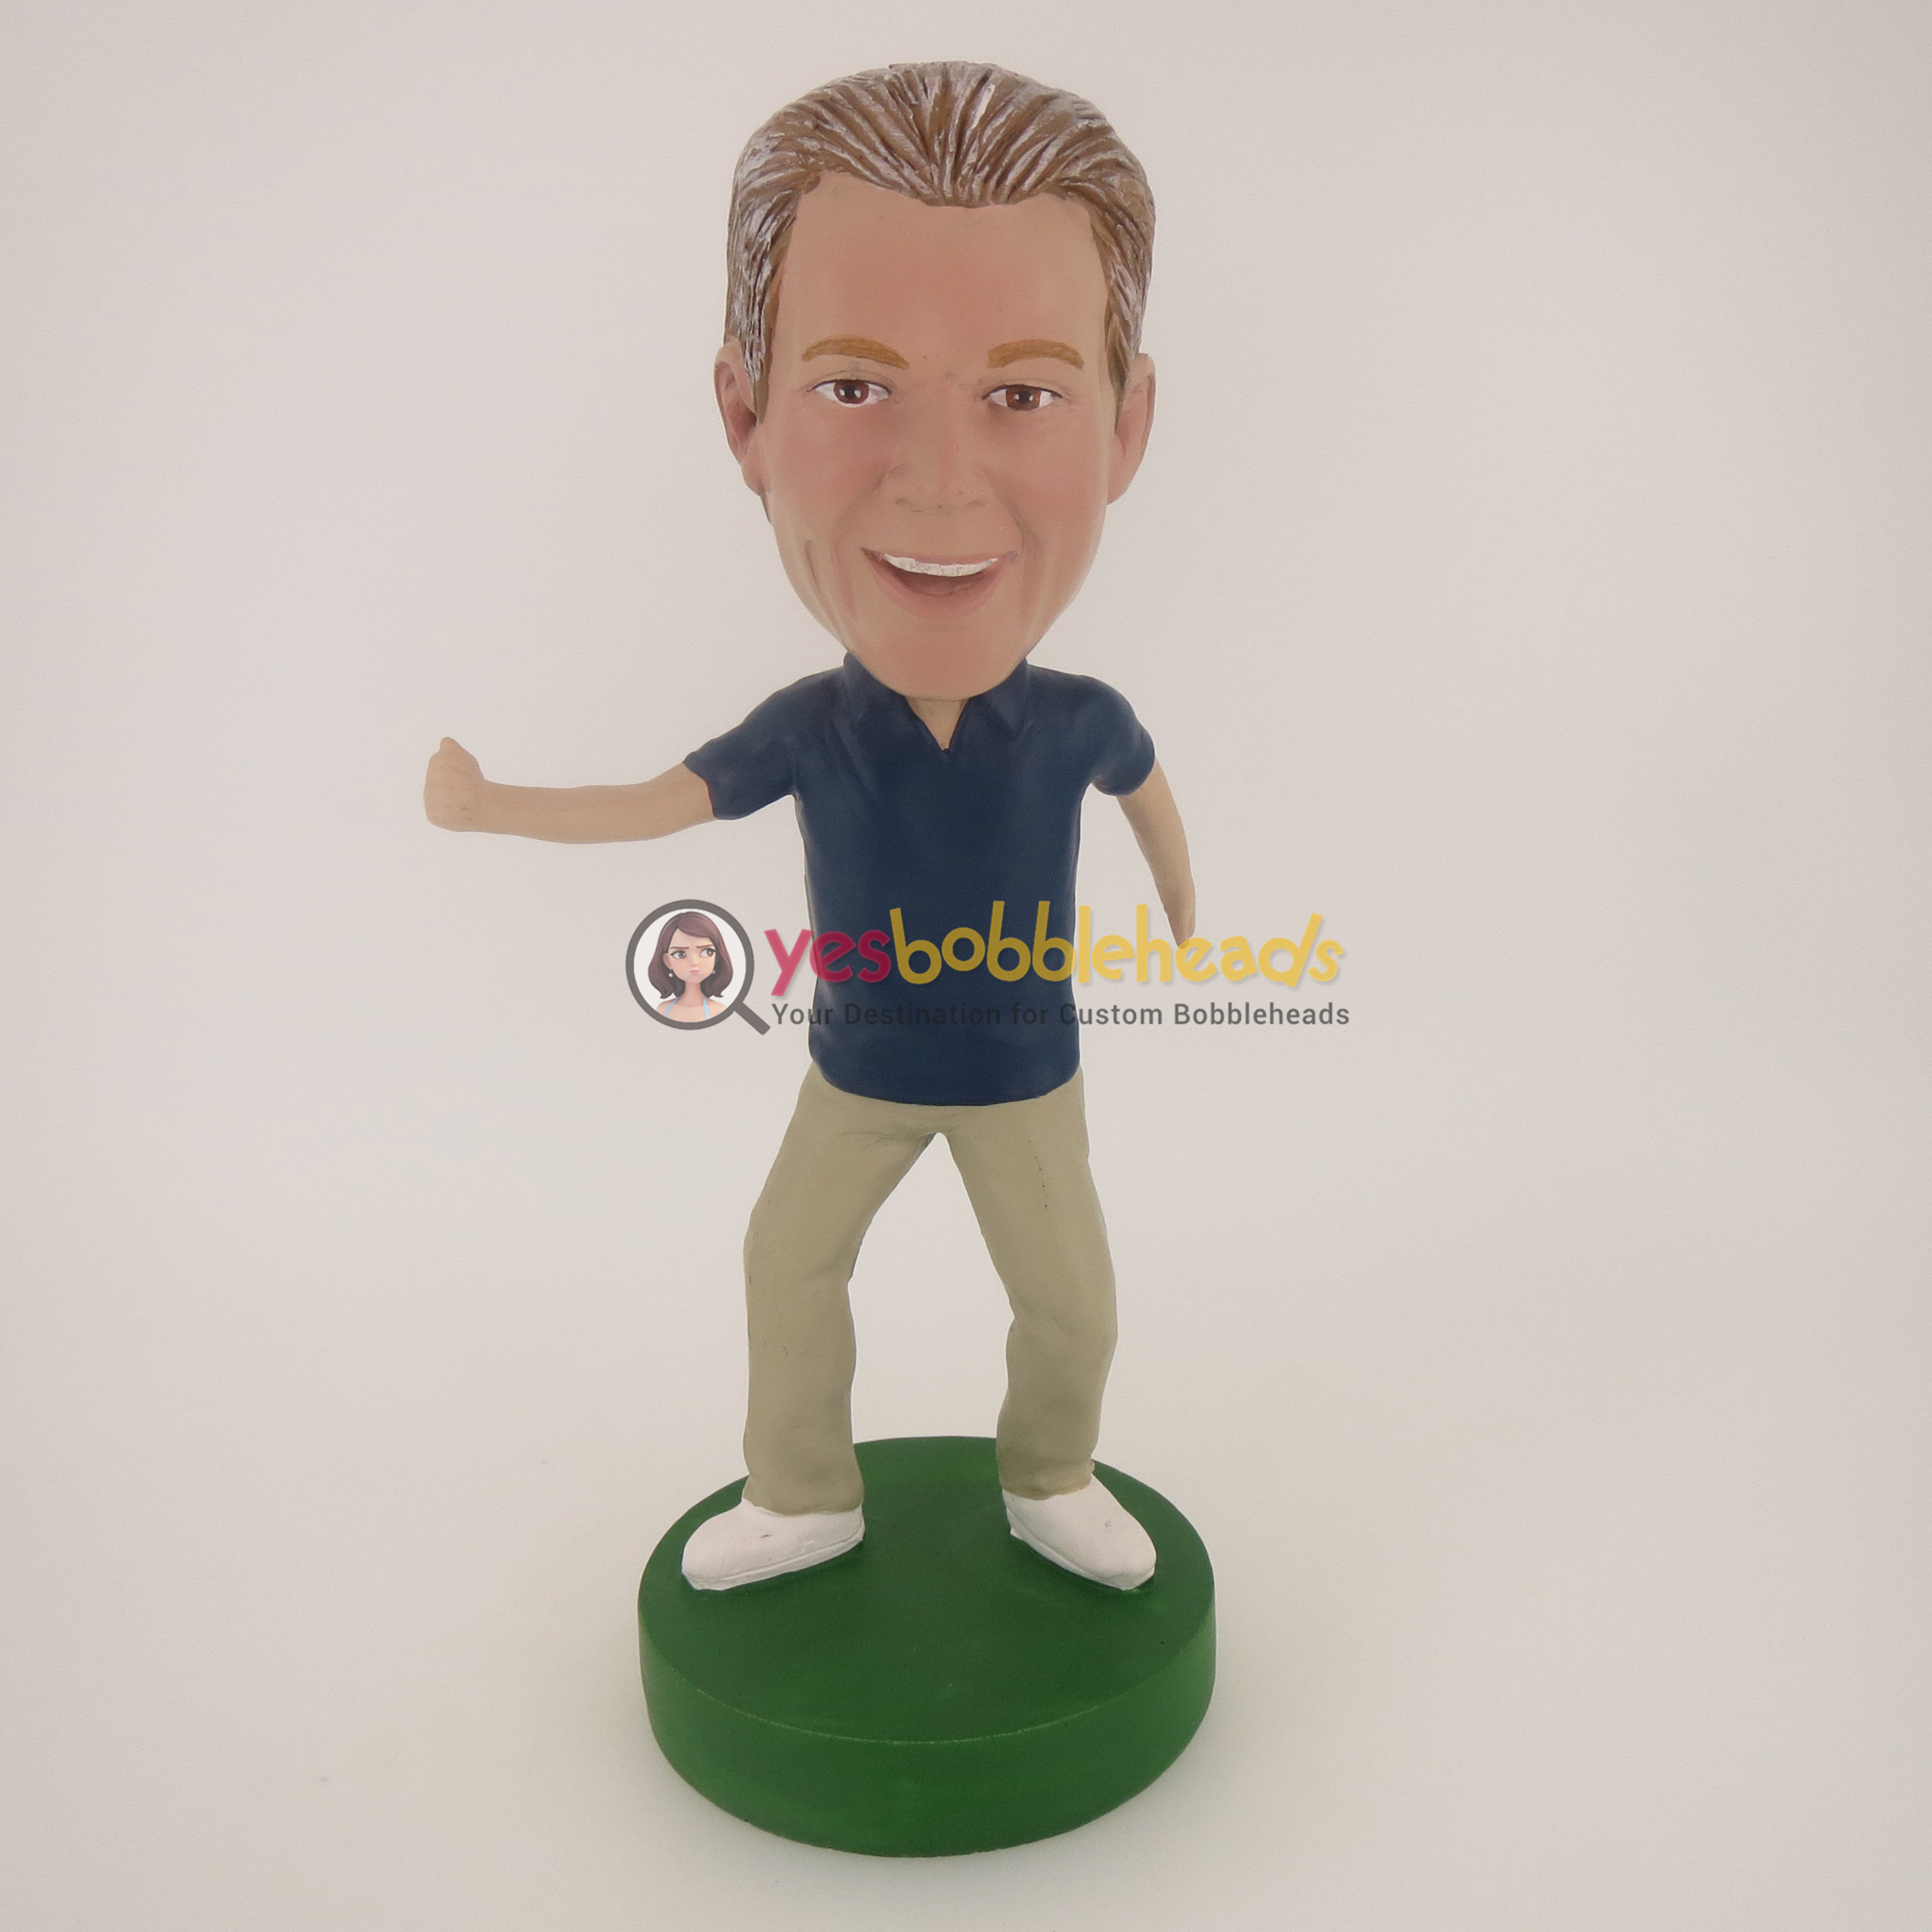 Picture of Custom Bobblehead Doll: Casual Man Happily Excercising